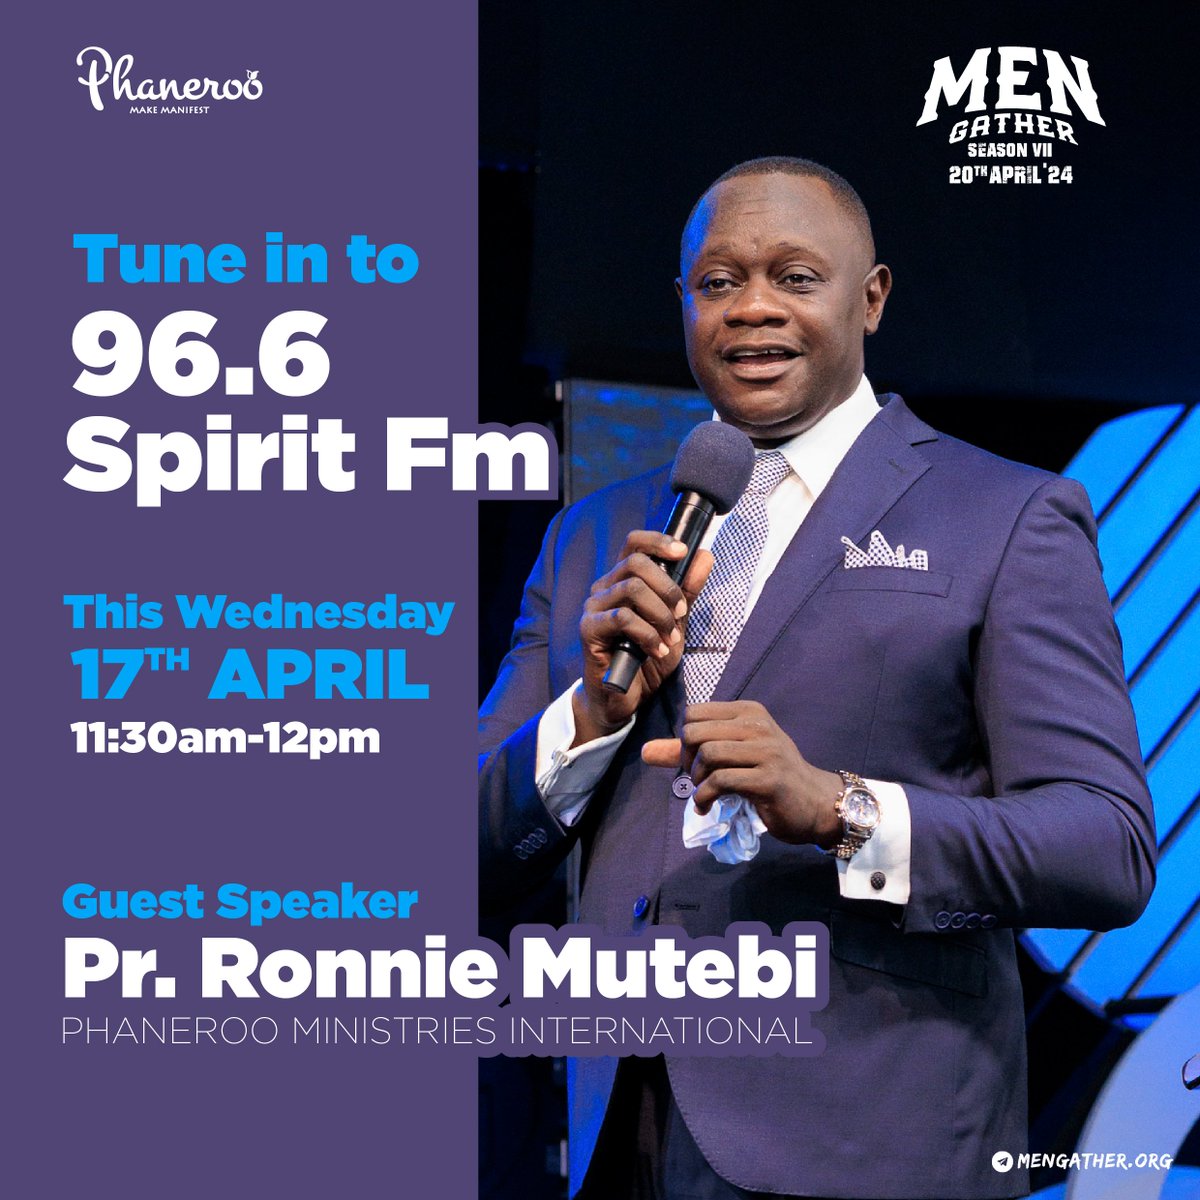 📻Tune in to 96.6 @Spiritfm966 with Pastor Ronnie Mutebi THIS MORNING from 11:30AM - 12PM EAT. #MenGatherVII #ThePriest